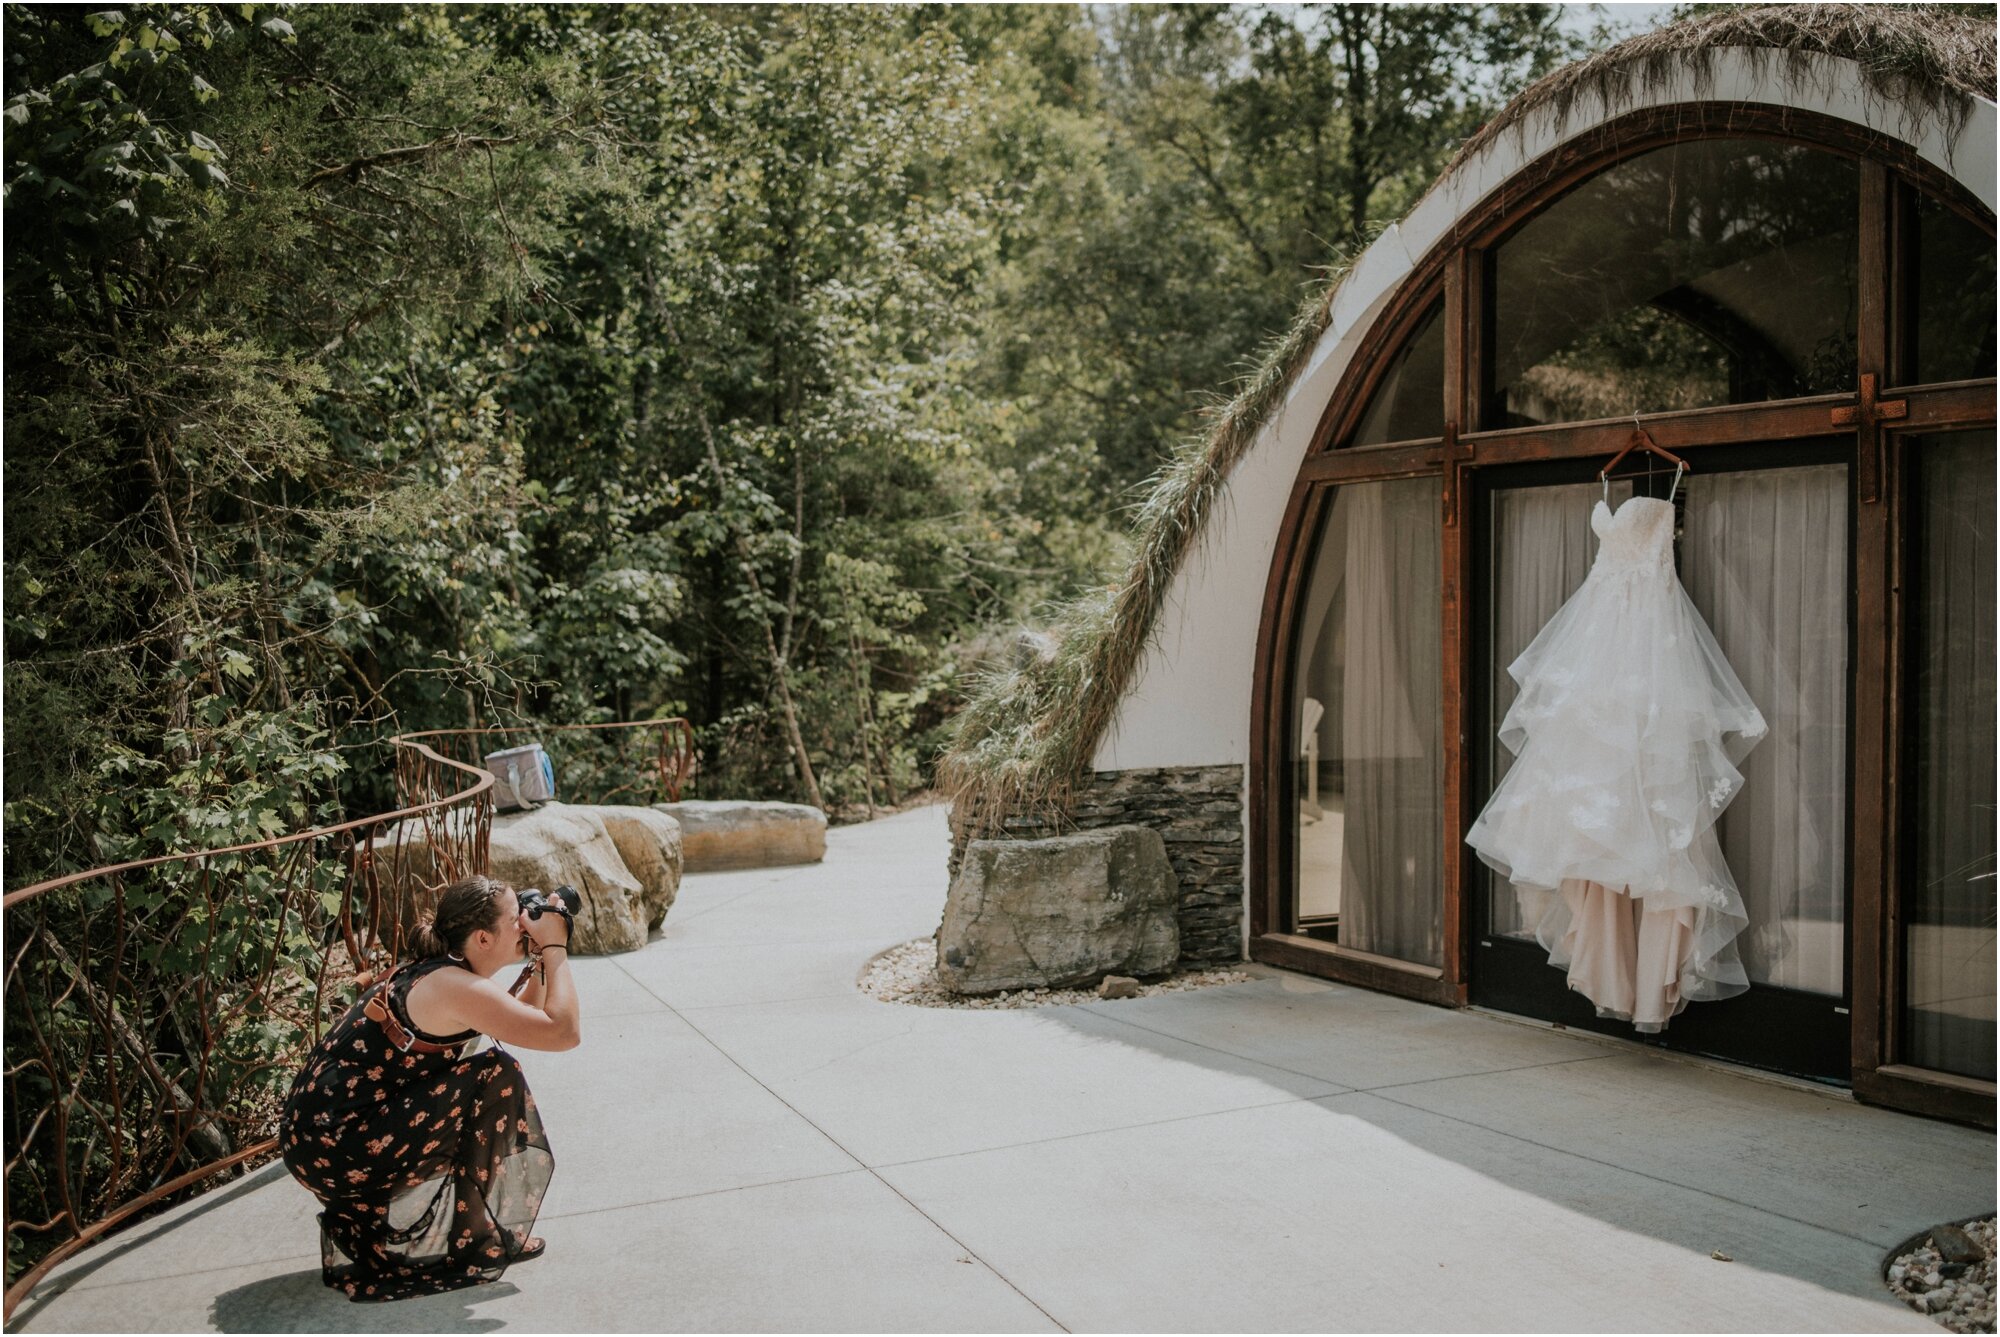   Next up was Ashley and Logan’s wedding at such a dreamy venue: THE WATERSTONE!   Photo: Jeremy Gouge  